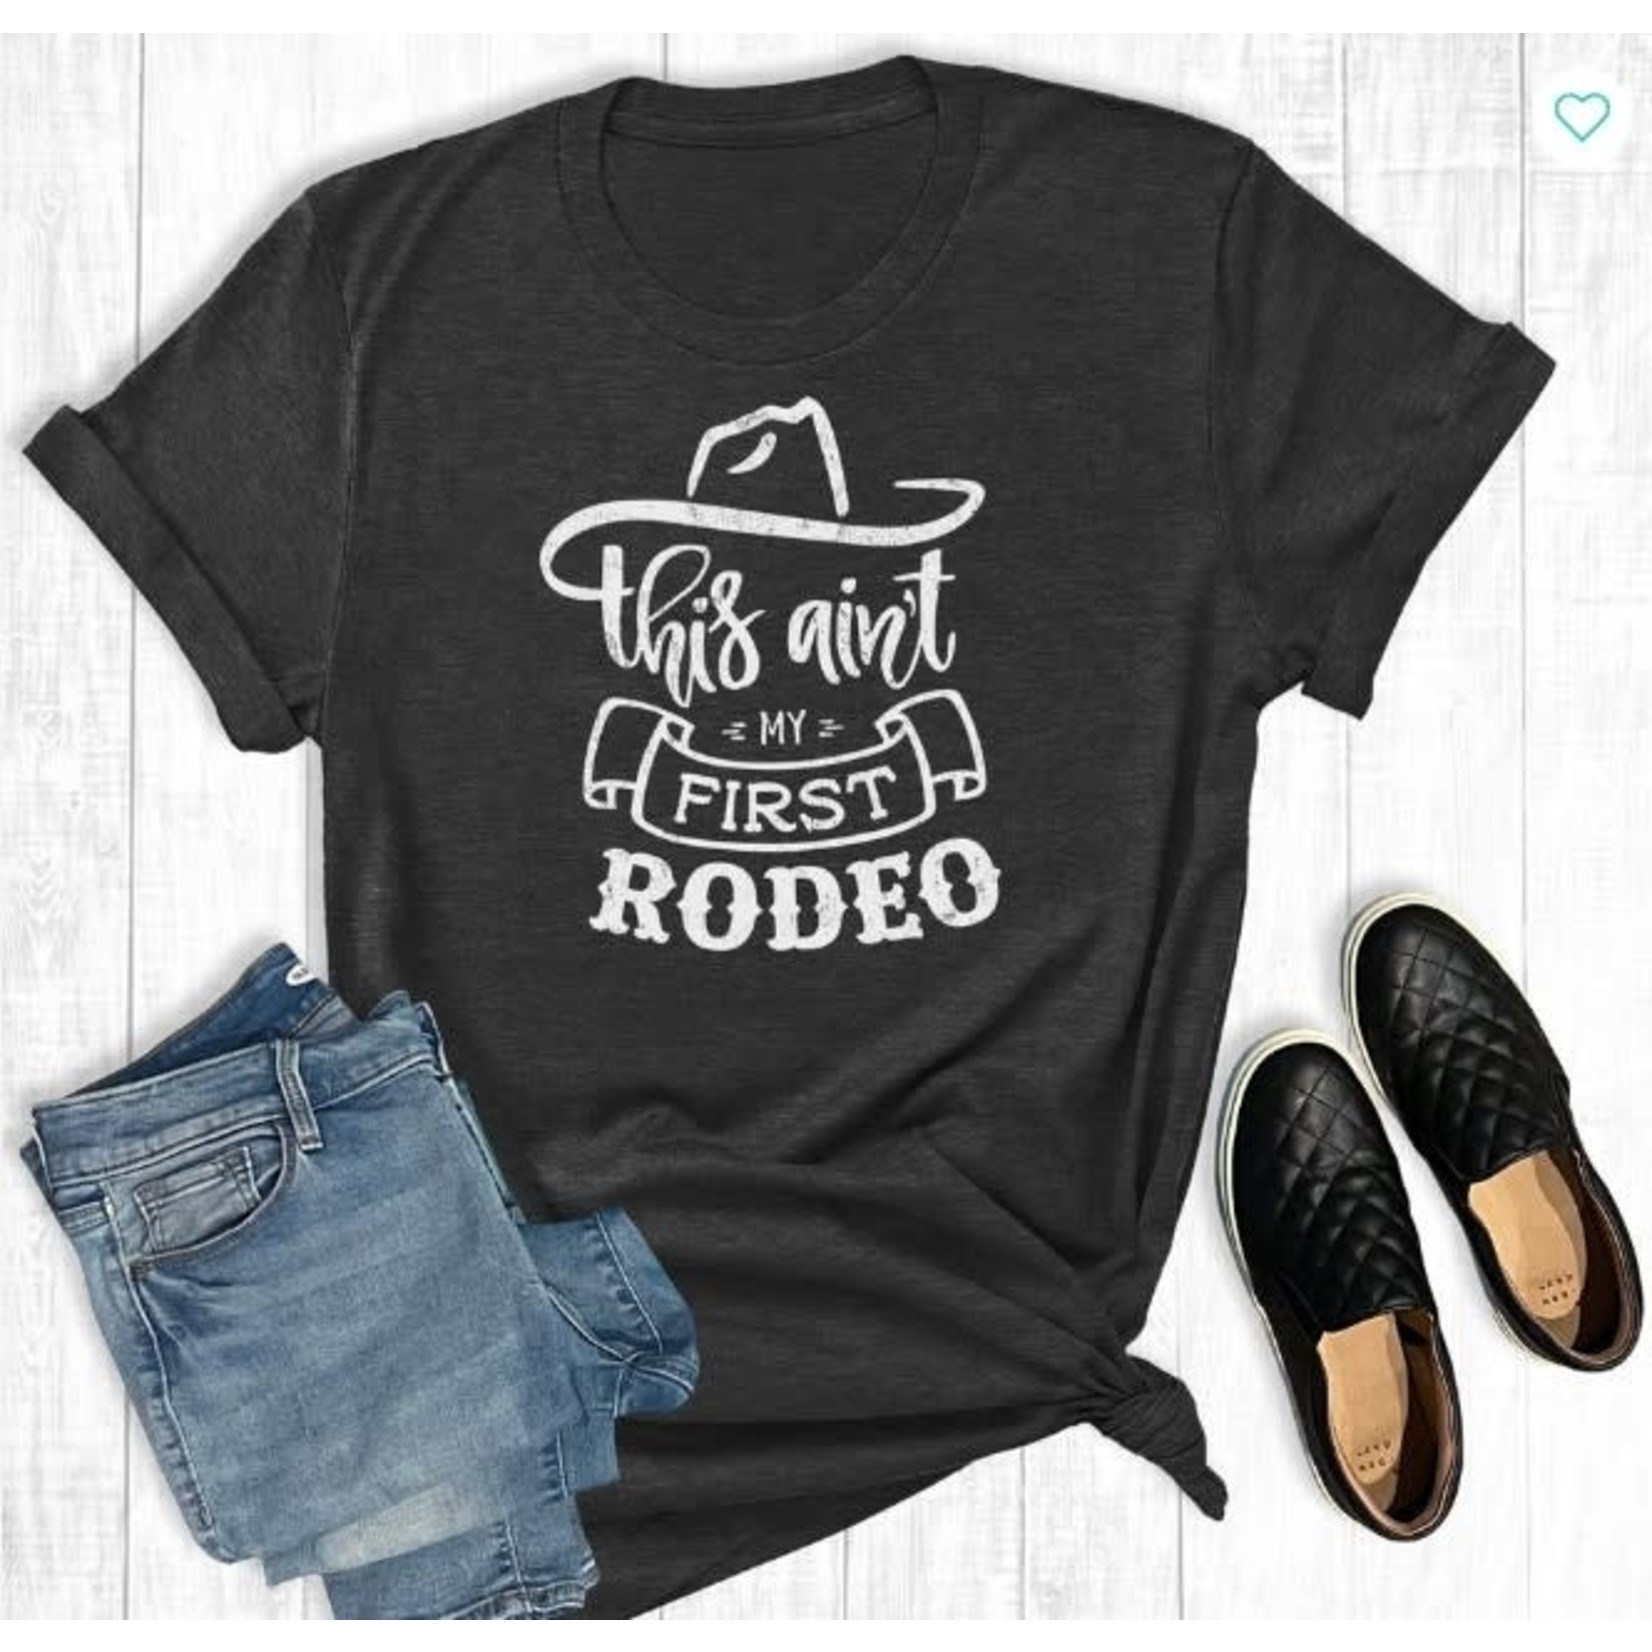 The Way Down South The Way Down South This Ain't my First Rodeo T-shirt